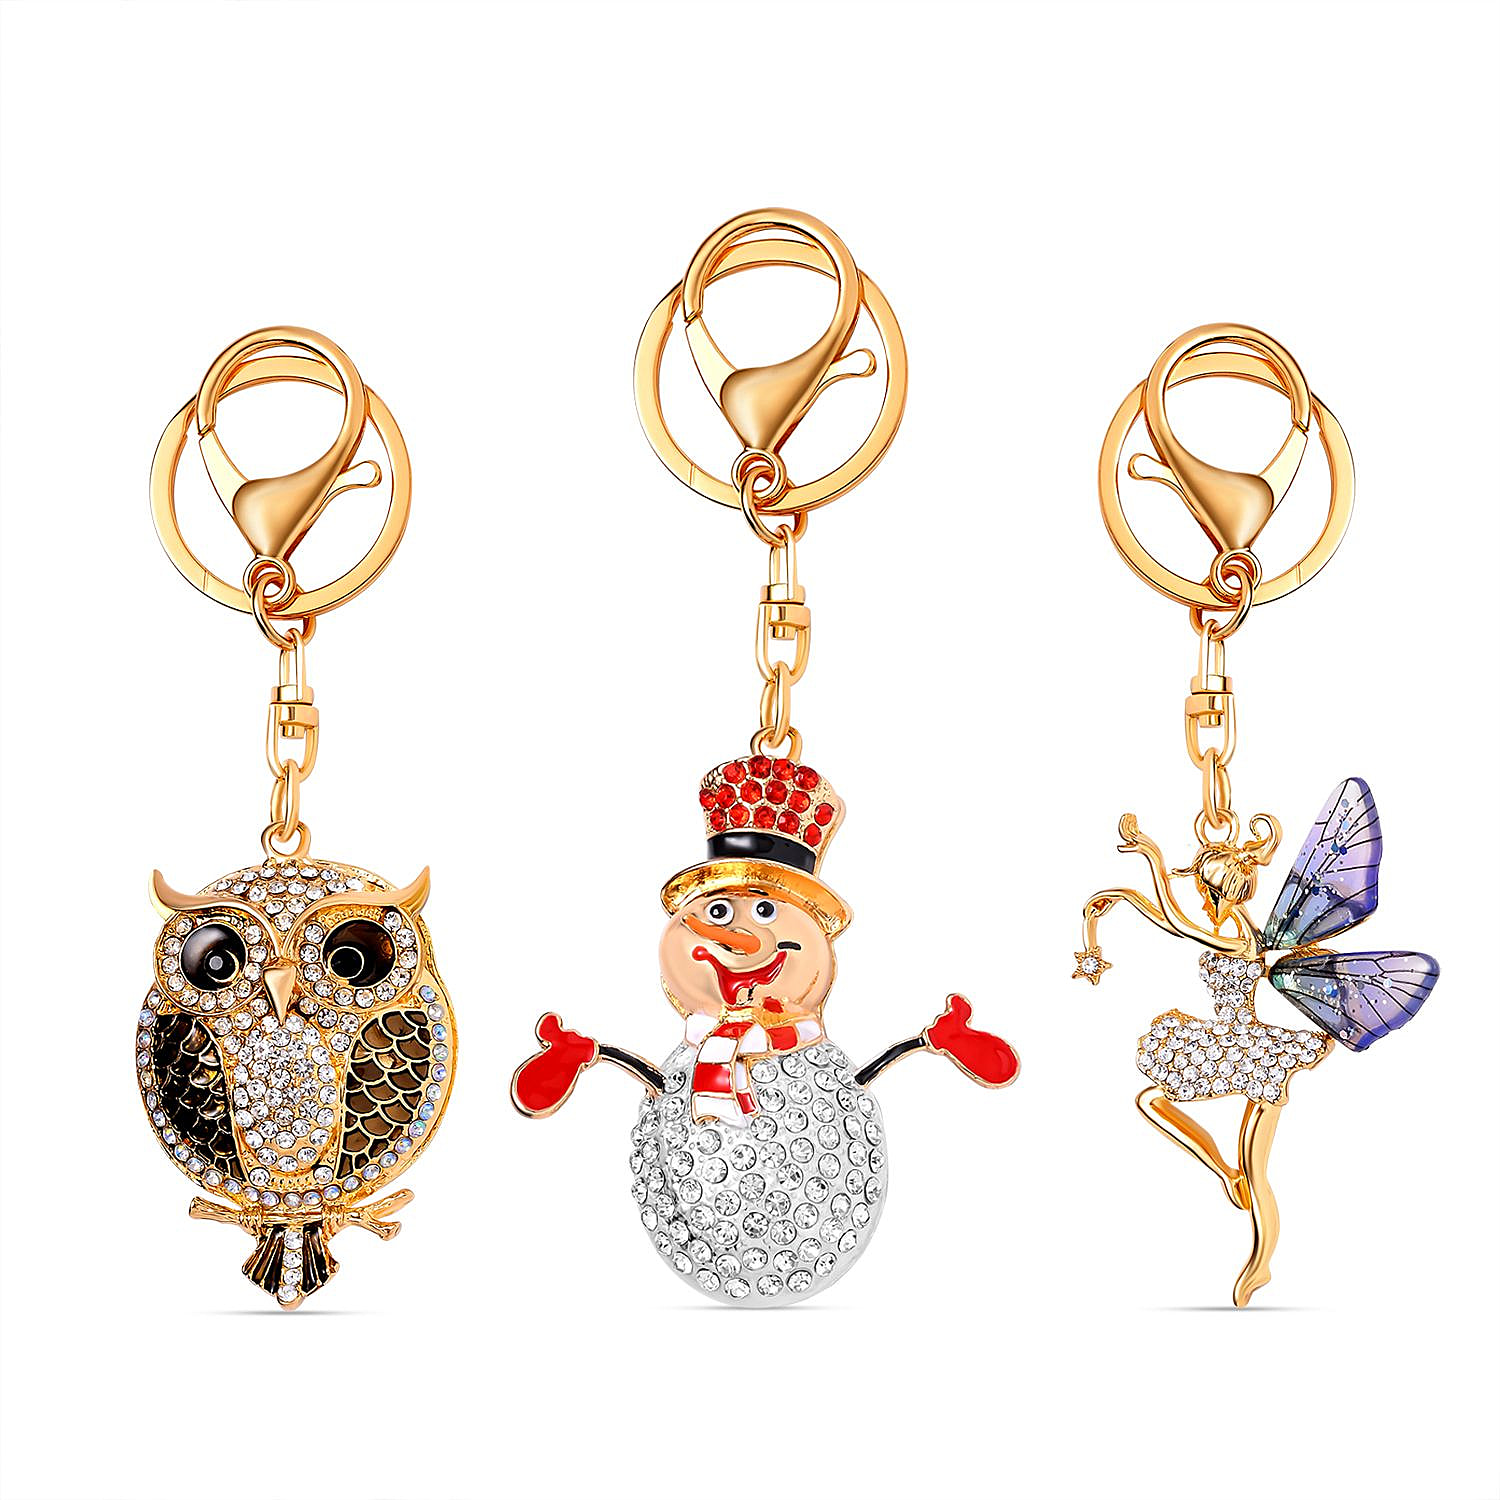 Set of 3 Sparkling Crystal Keychains With Different Designs (Snowman, Fairy, and Owl) - Multi